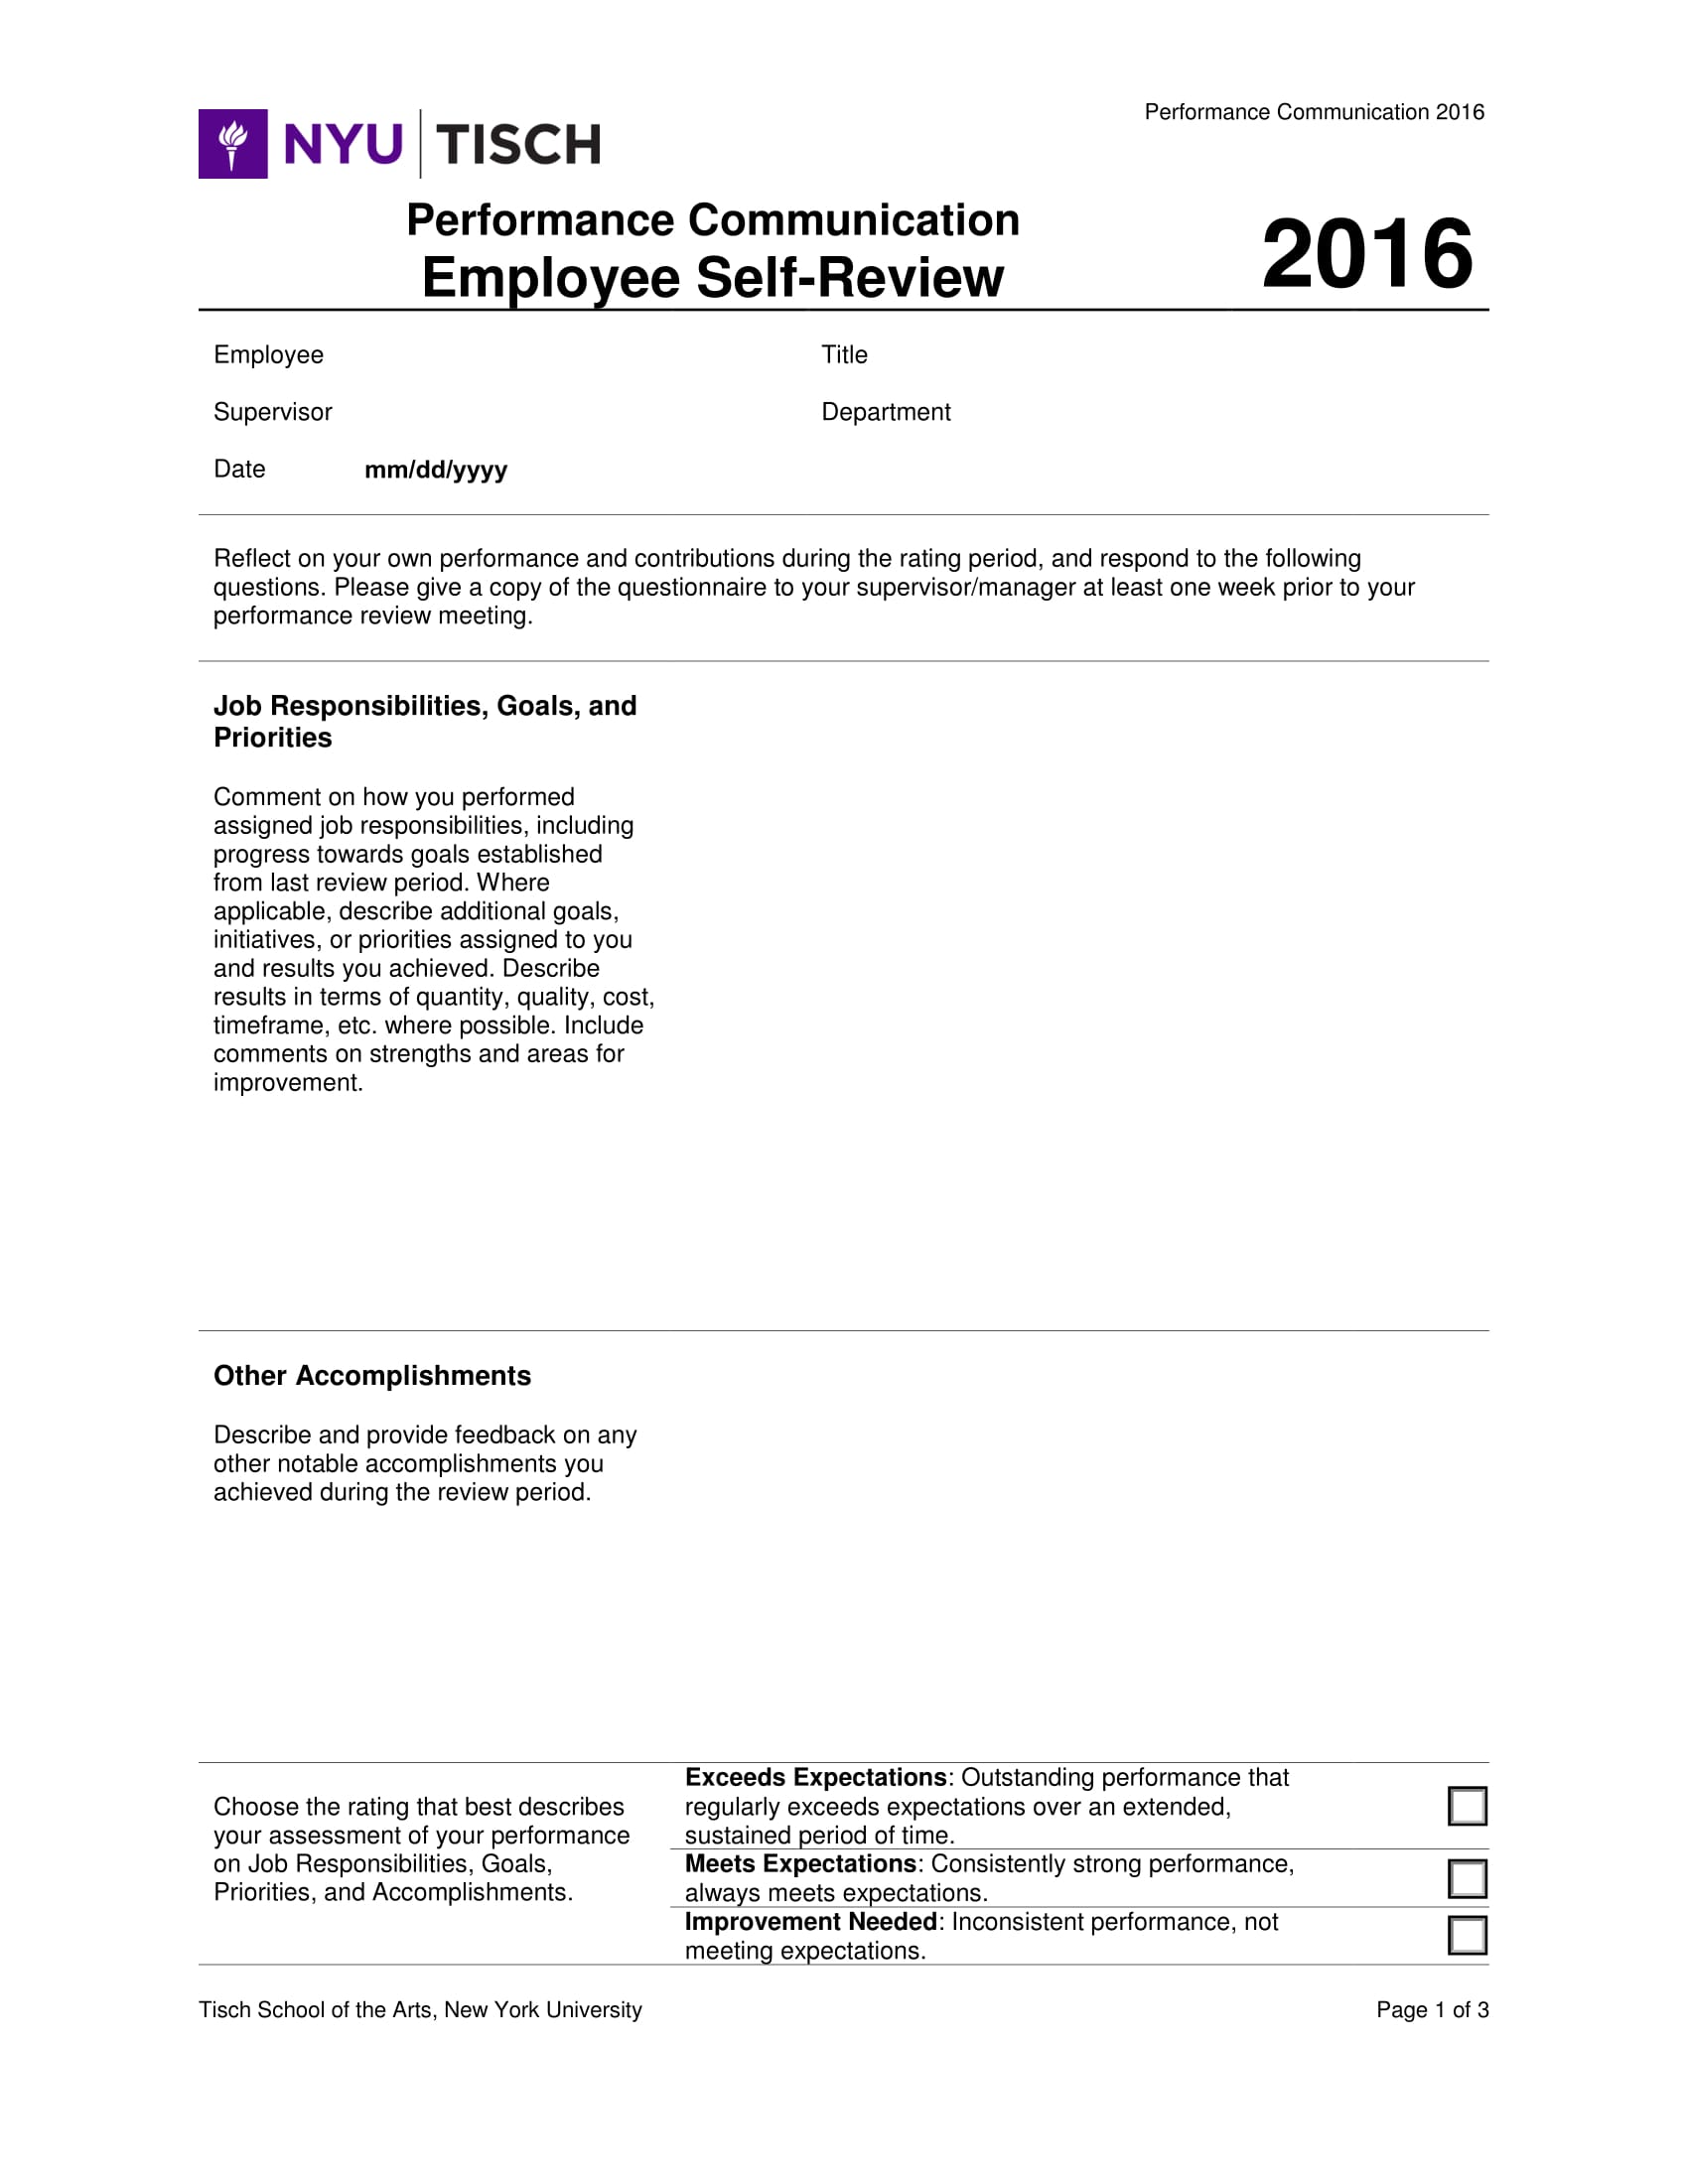 employee performance self review form 11